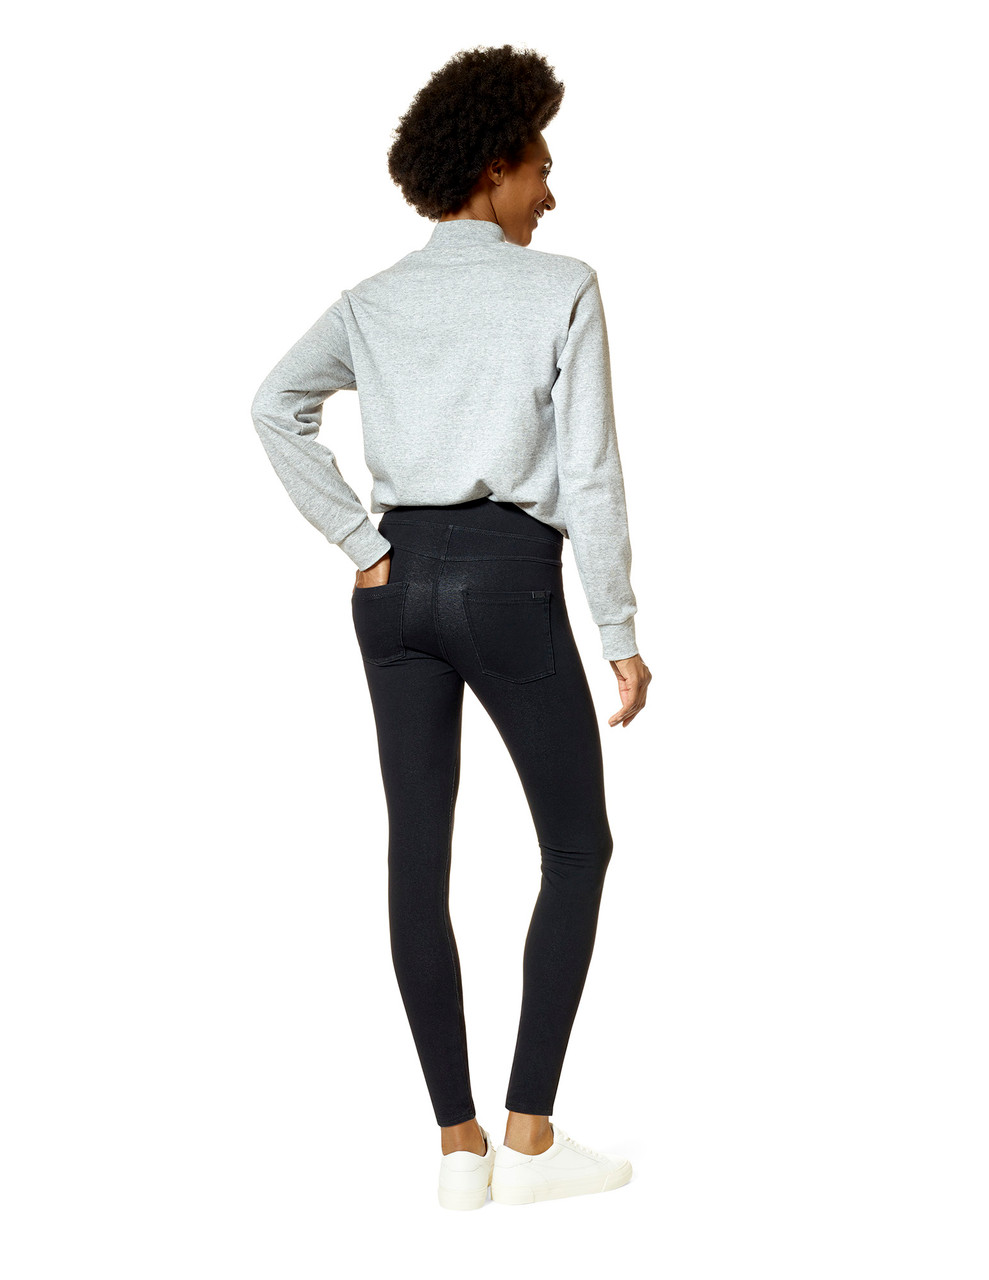 Homma leggings are a game-changer! Super comfy, crazy stretchy